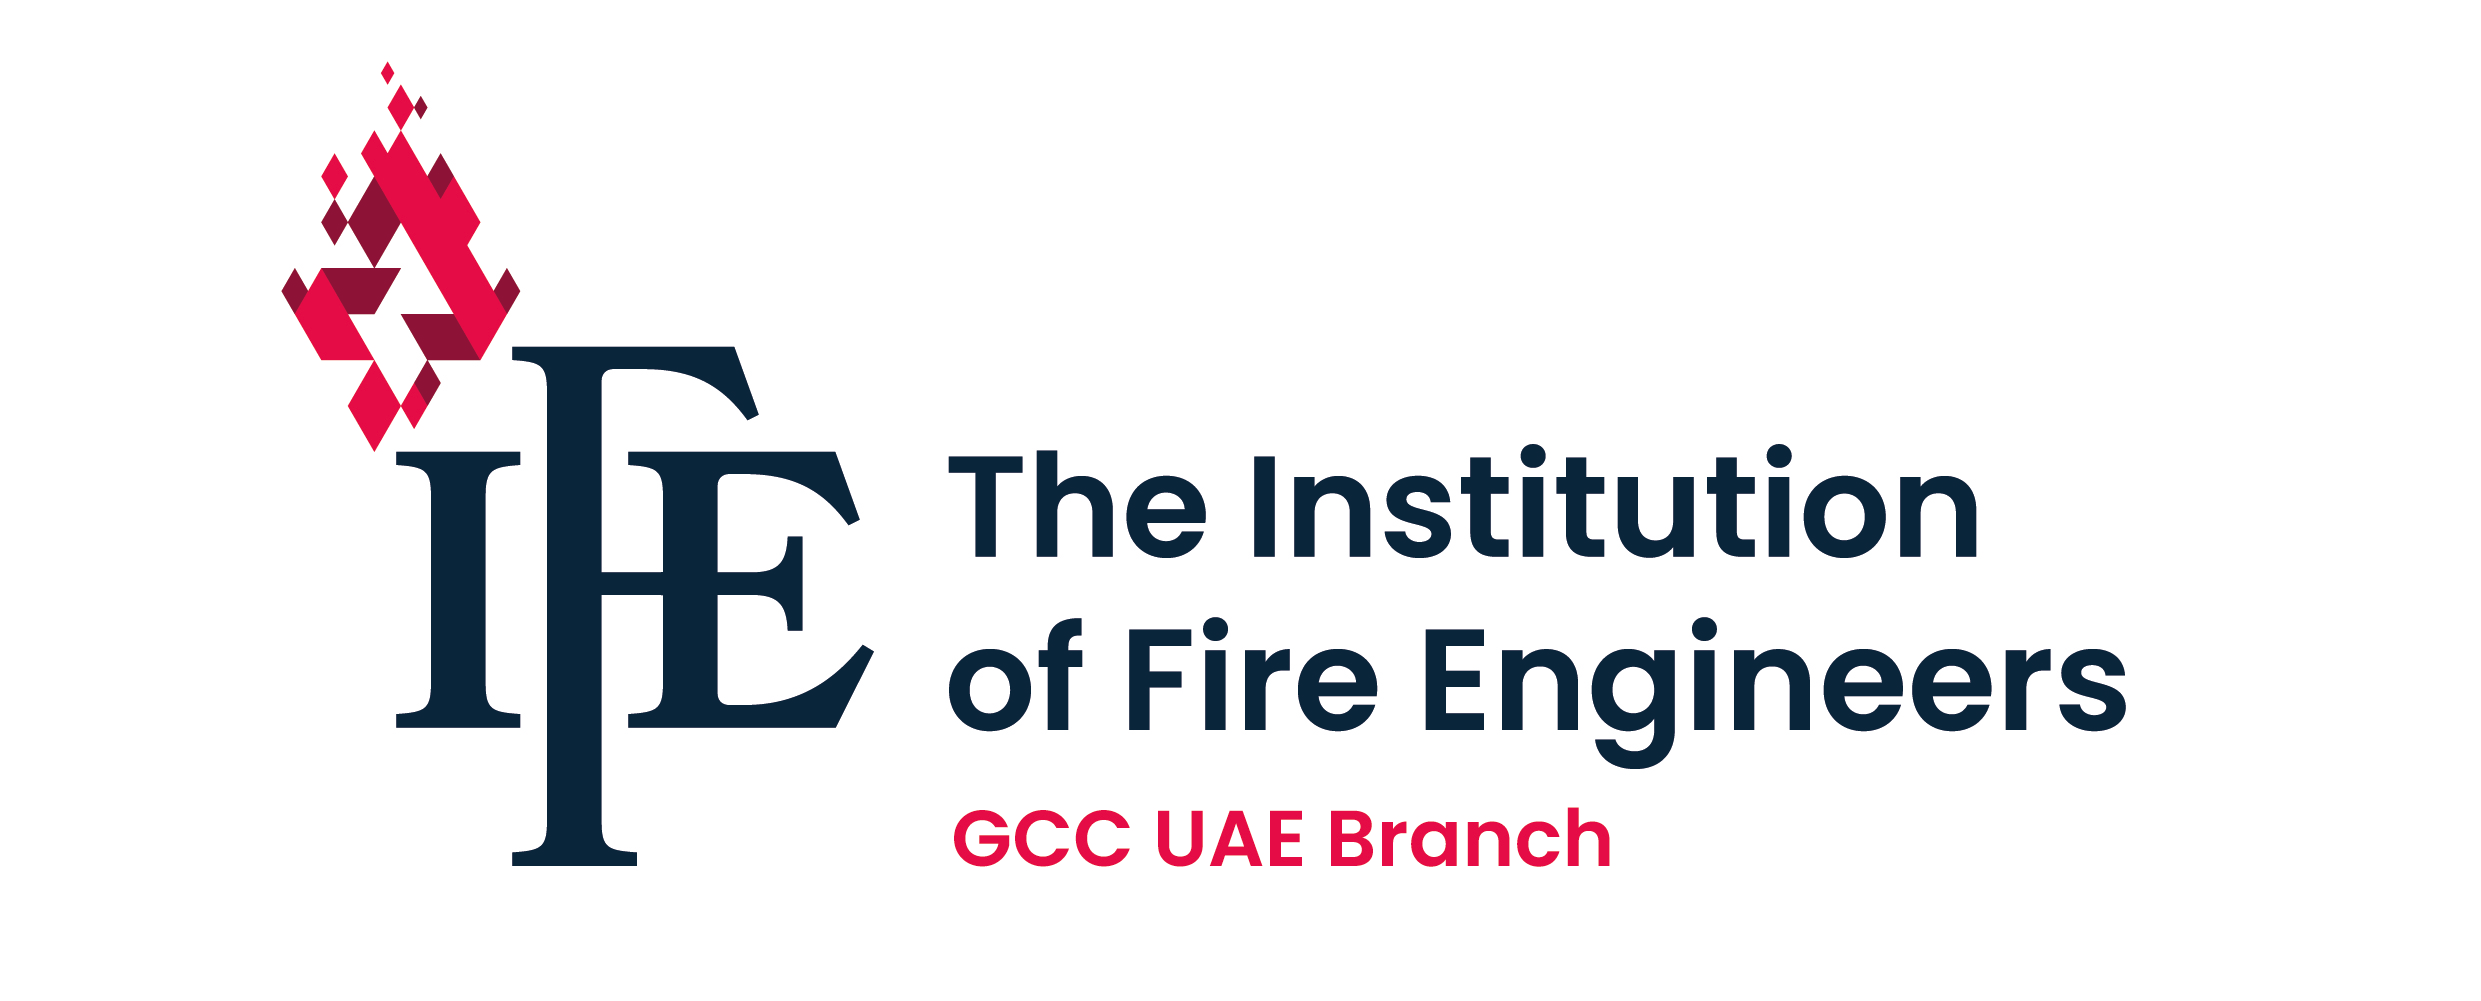 IFE Branch Logo GCC UAE Red and Blue cropped